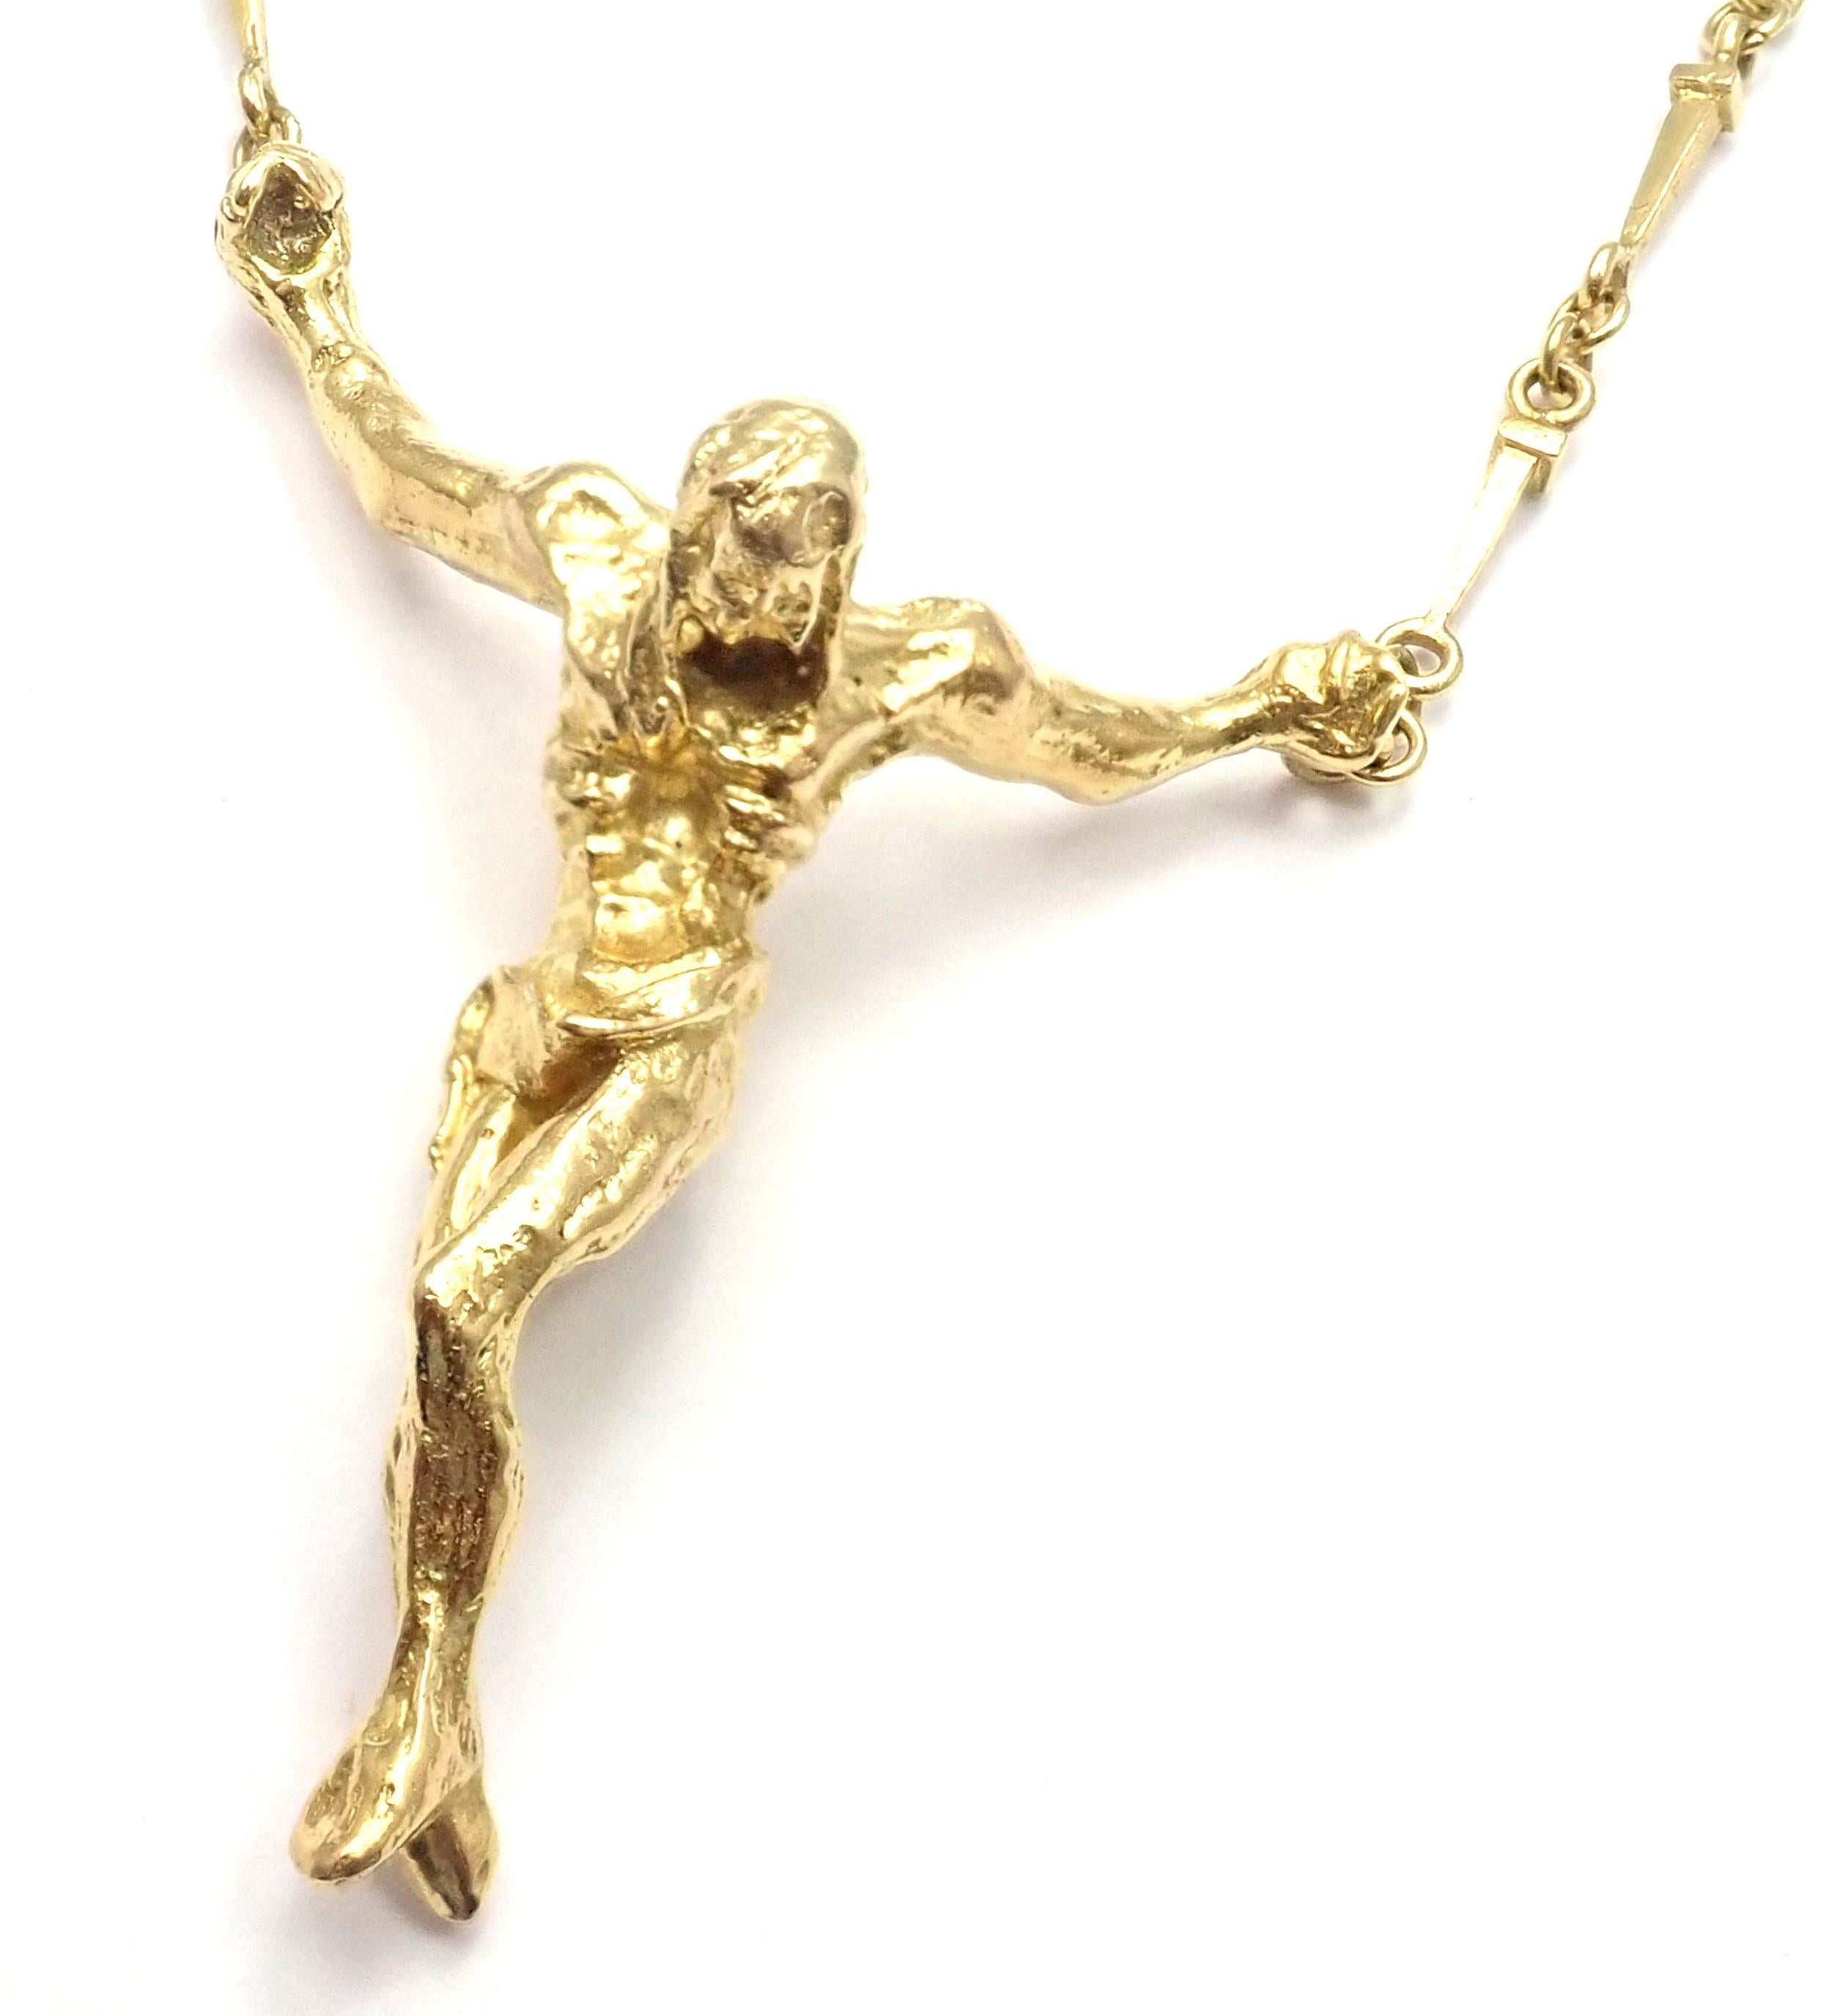 Limited Edition 18k Yellow Gold Salvador Dali Large Christ Saint John On The Cross Bracelet Necklace Set. 
This is a limited edition numbered piece from 1970's, number 758.
Accompanying with certificate of authenticity and an original box.
Details: